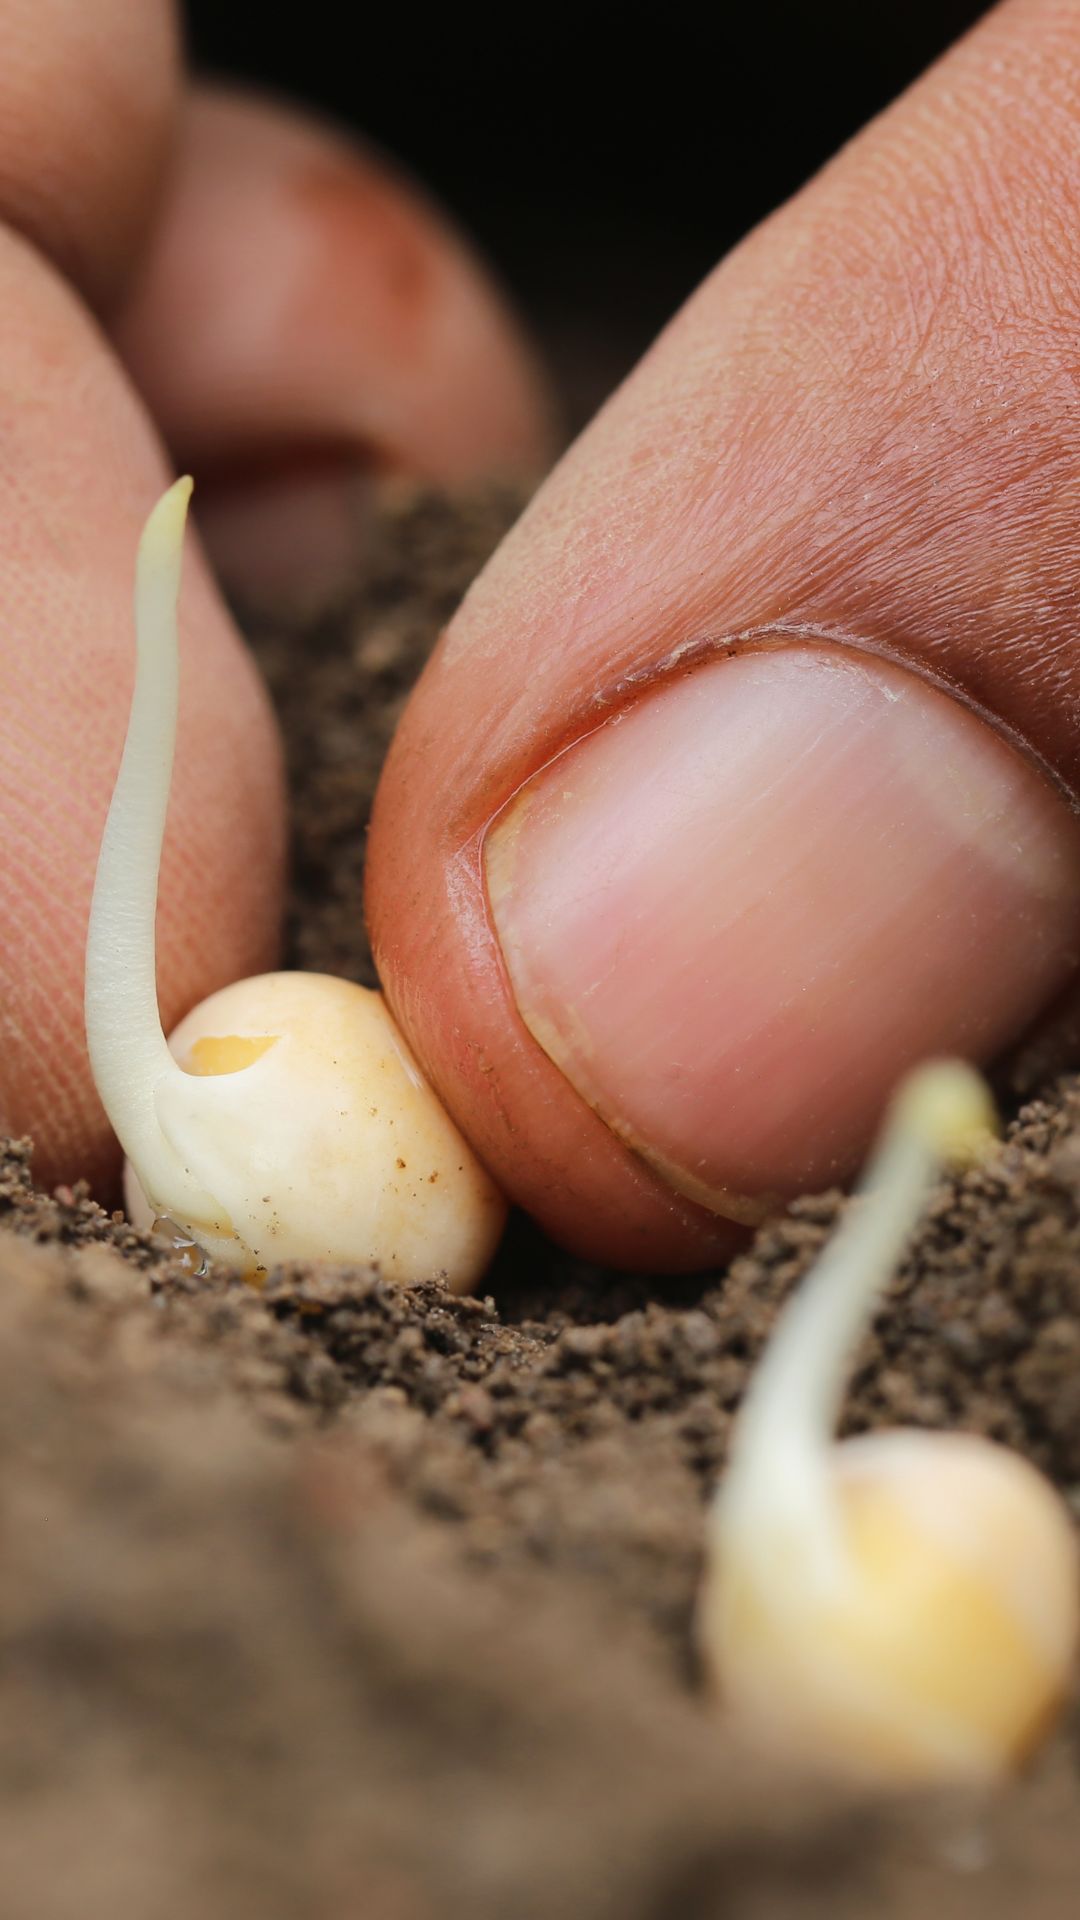 After placing the pre-sprouted peas in their designated spots, carefully backfill the holes or furrow with soil. Ensure that the peas are covered adequately but not buried too deeply. Once the backfilling is complete, water the peas thoroughly, giving them a good drink.